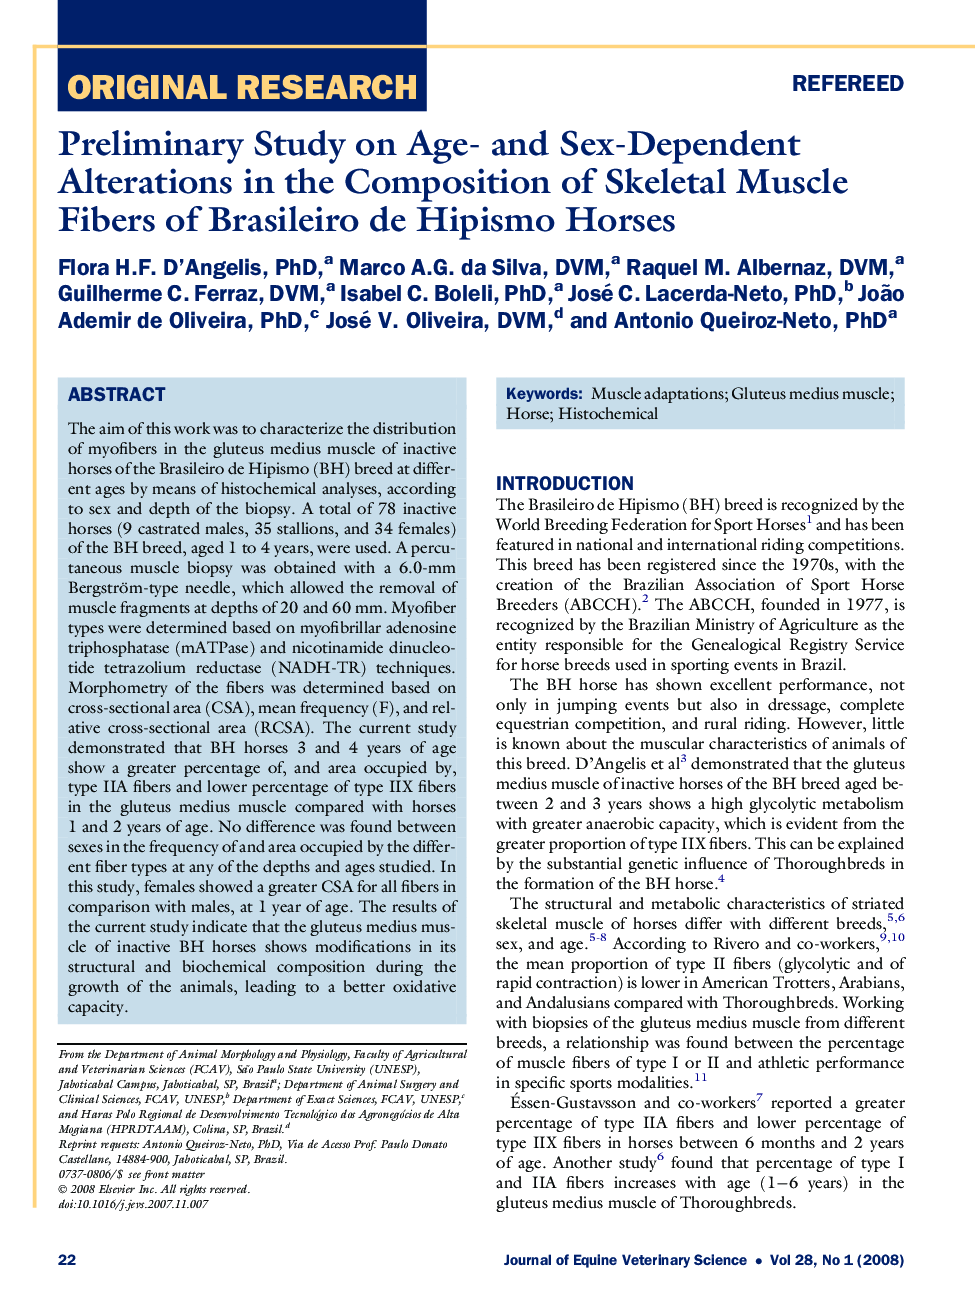 Preliminary Study on Age- and Sex-Dependent Alterations in the Composition of Skeletal Muscle Fibers of Brasileiro de Hipismo Horses 